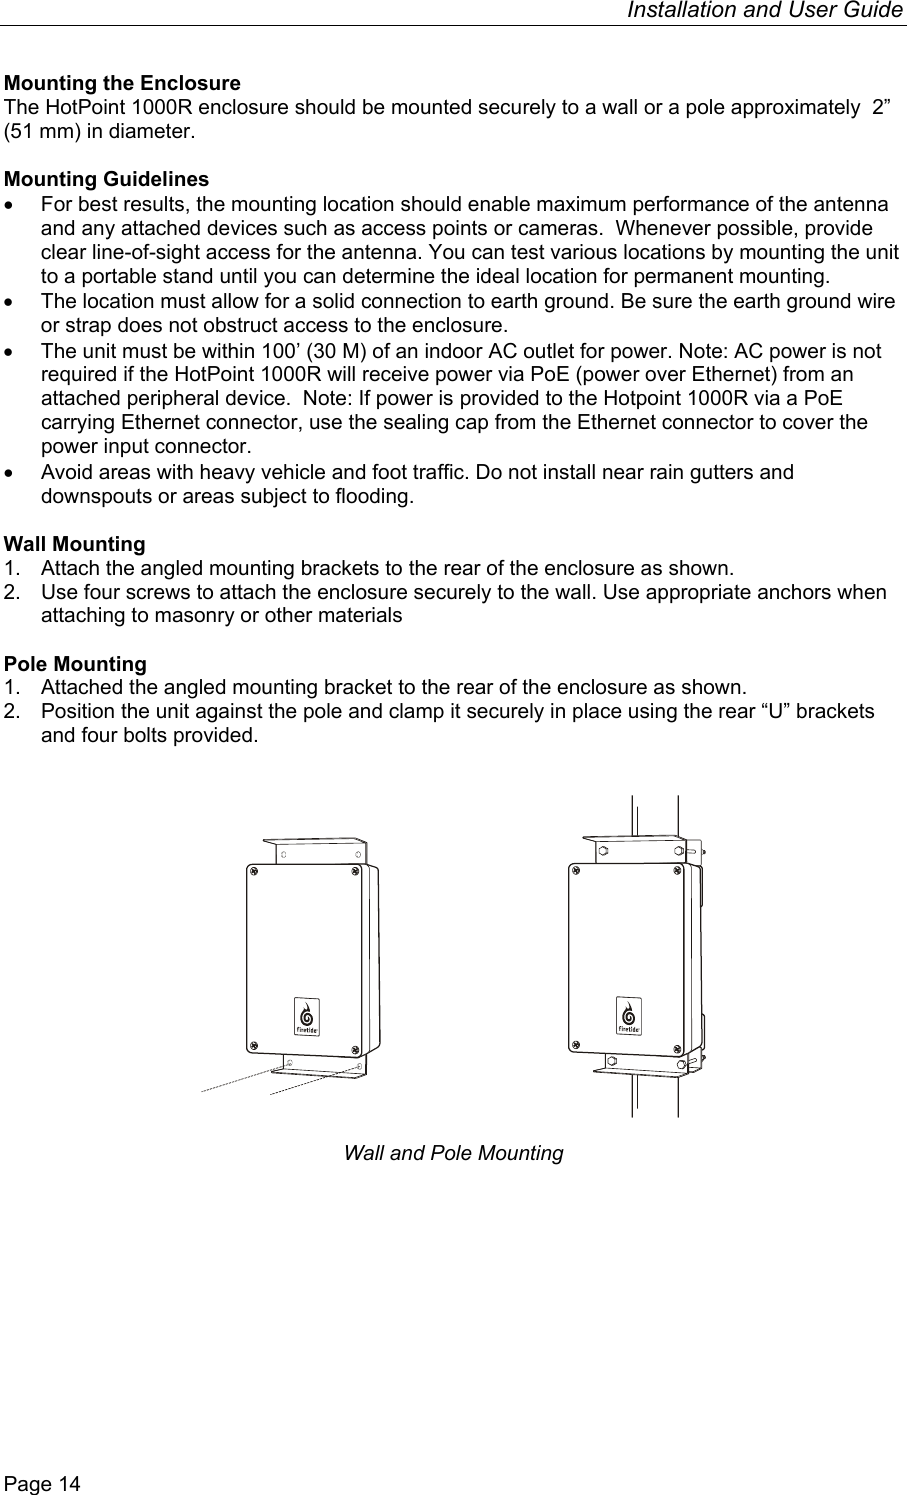 Installation and User Guide  Page 14 Mounting the Enclosure The HotPoint 1000R enclosure should be mounted securely to a wall or a pole approximately  2” (51 mm) in diameter.   Mounting Guidelines •  For best results, the mounting location should enable maximum performance of the antenna and any attached devices such as access points or cameras.  Whenever possible, provide clear line-of-sight access for the antenna. You can test various locations by mounting the unit to a portable stand until you can determine the ideal location for permanent mounting. •  The location must allow for a solid connection to earth ground. Be sure the earth ground wire or strap does not obstruct access to the enclosure.  •  The unit must be within 100’ (30 M) of an indoor AC outlet for power. Note: AC power is not required if the HotPoint 1000R will receive power via PoE (power over Ethernet) from an attached peripheral device.  Note: If power is provided to the Hotpoint 1000R via a PoE carrying Ethernet connector, use the sealing cap from the Ethernet connector to cover the power input connector. •  Avoid areas with heavy vehicle and foot traffic. Do not install near rain gutters and downspouts or areas subject to flooding.  Wall Mounting 1.  Attach the angled mounting brackets to the rear of the enclosure as shown. 2.  Use four screws to attach the enclosure securely to the wall. Use appropriate anchors when attaching to masonry or other materials  Pole Mounting 1.  Attached the angled mounting bracket to the rear of the enclosure as shown. 2.  Position the unit against the pole and clamp it securely in place using the rear “U” brackets and four bolts provided.        Wall and Pole Mounting   